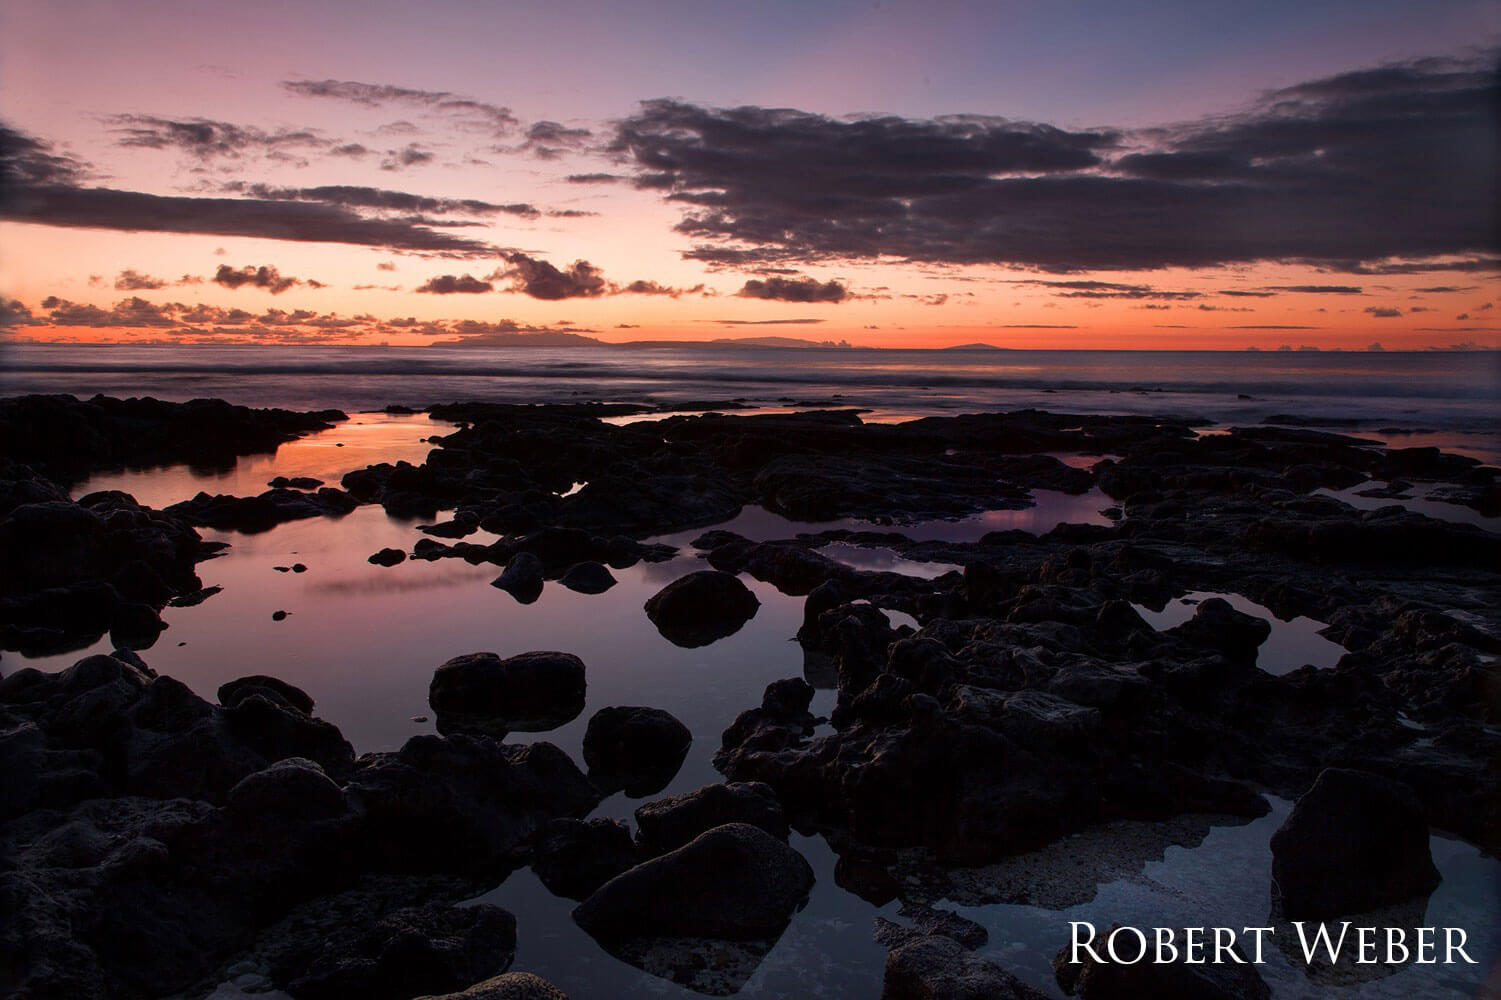 Warm sunrise over a tide pool with some clouds in the sky.